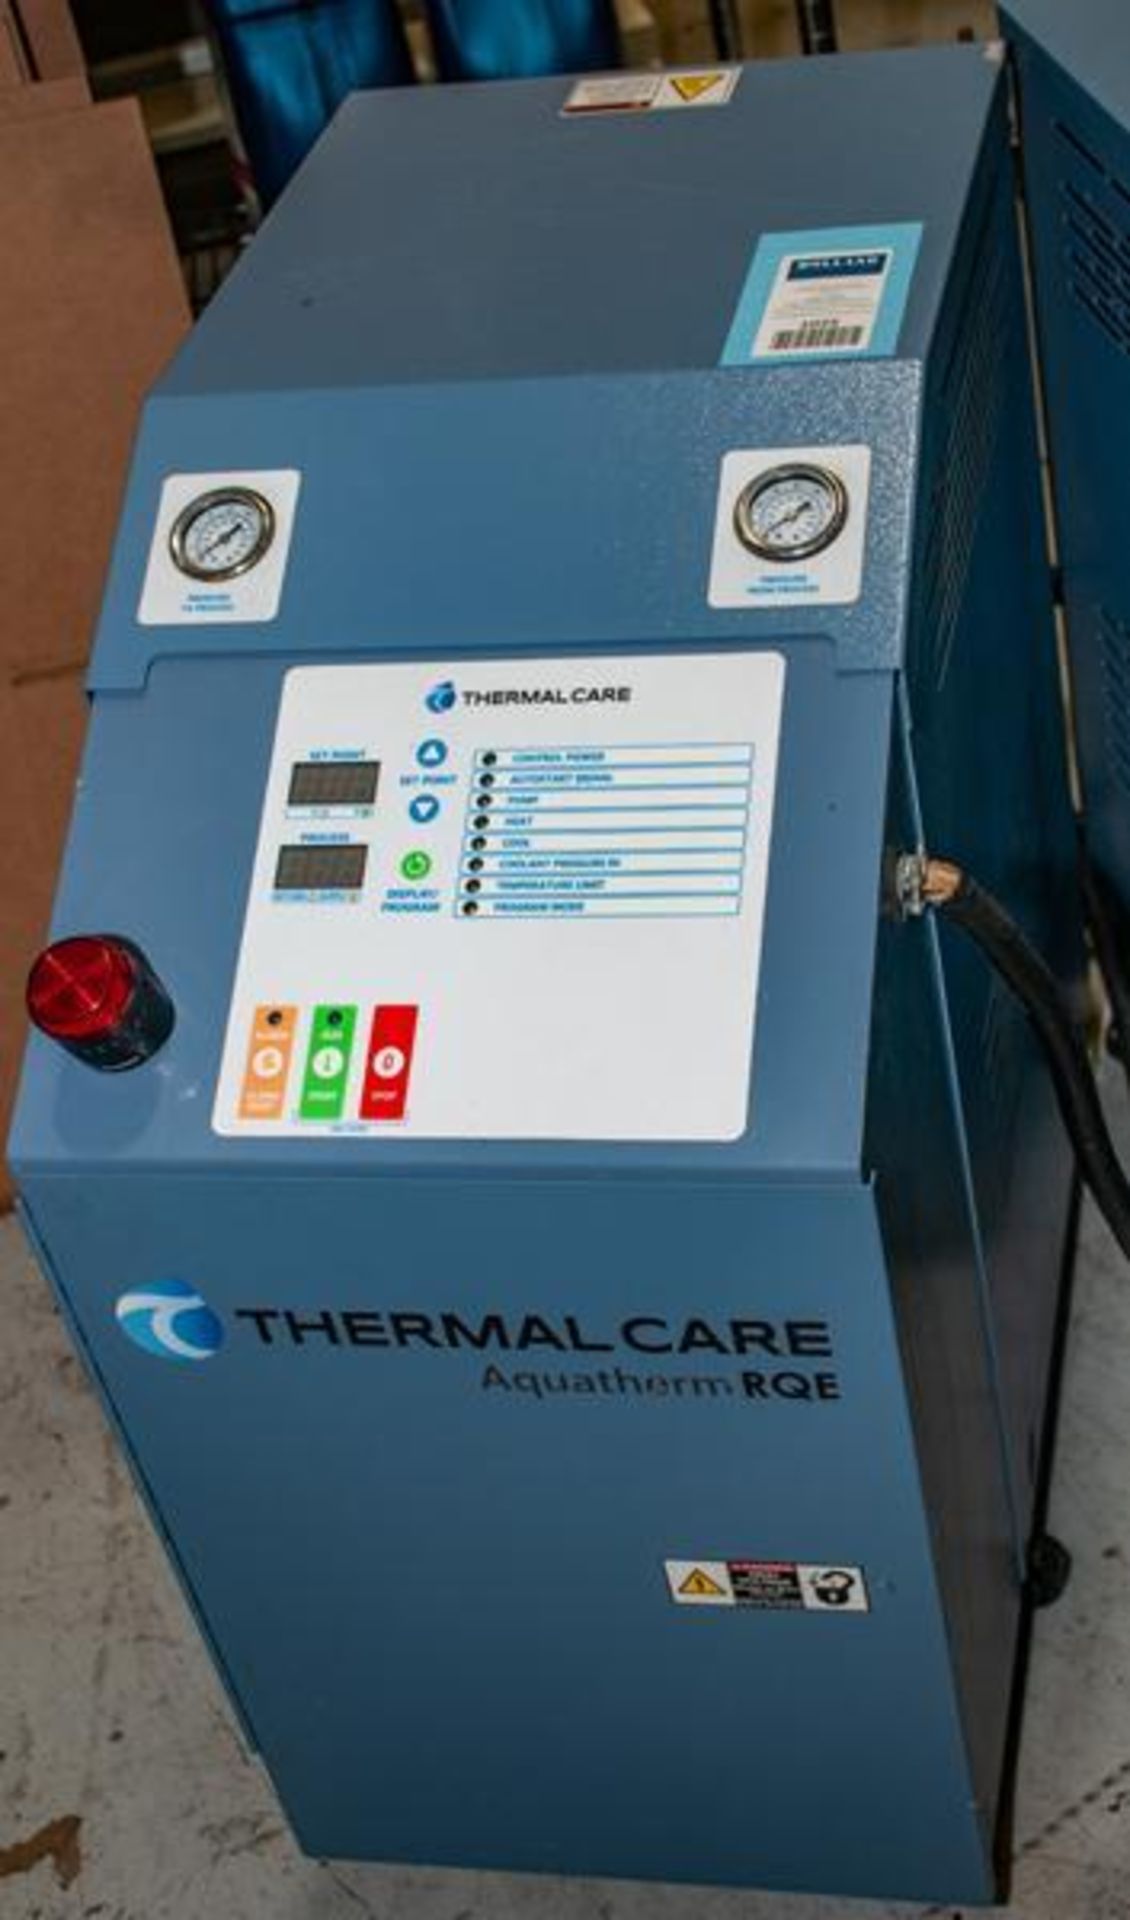 ThermalCare Aquatherm RQE Mold temperature controller, 230v 3ph, Mdl RQE0908, s/n 4146861903, 3/4 hp